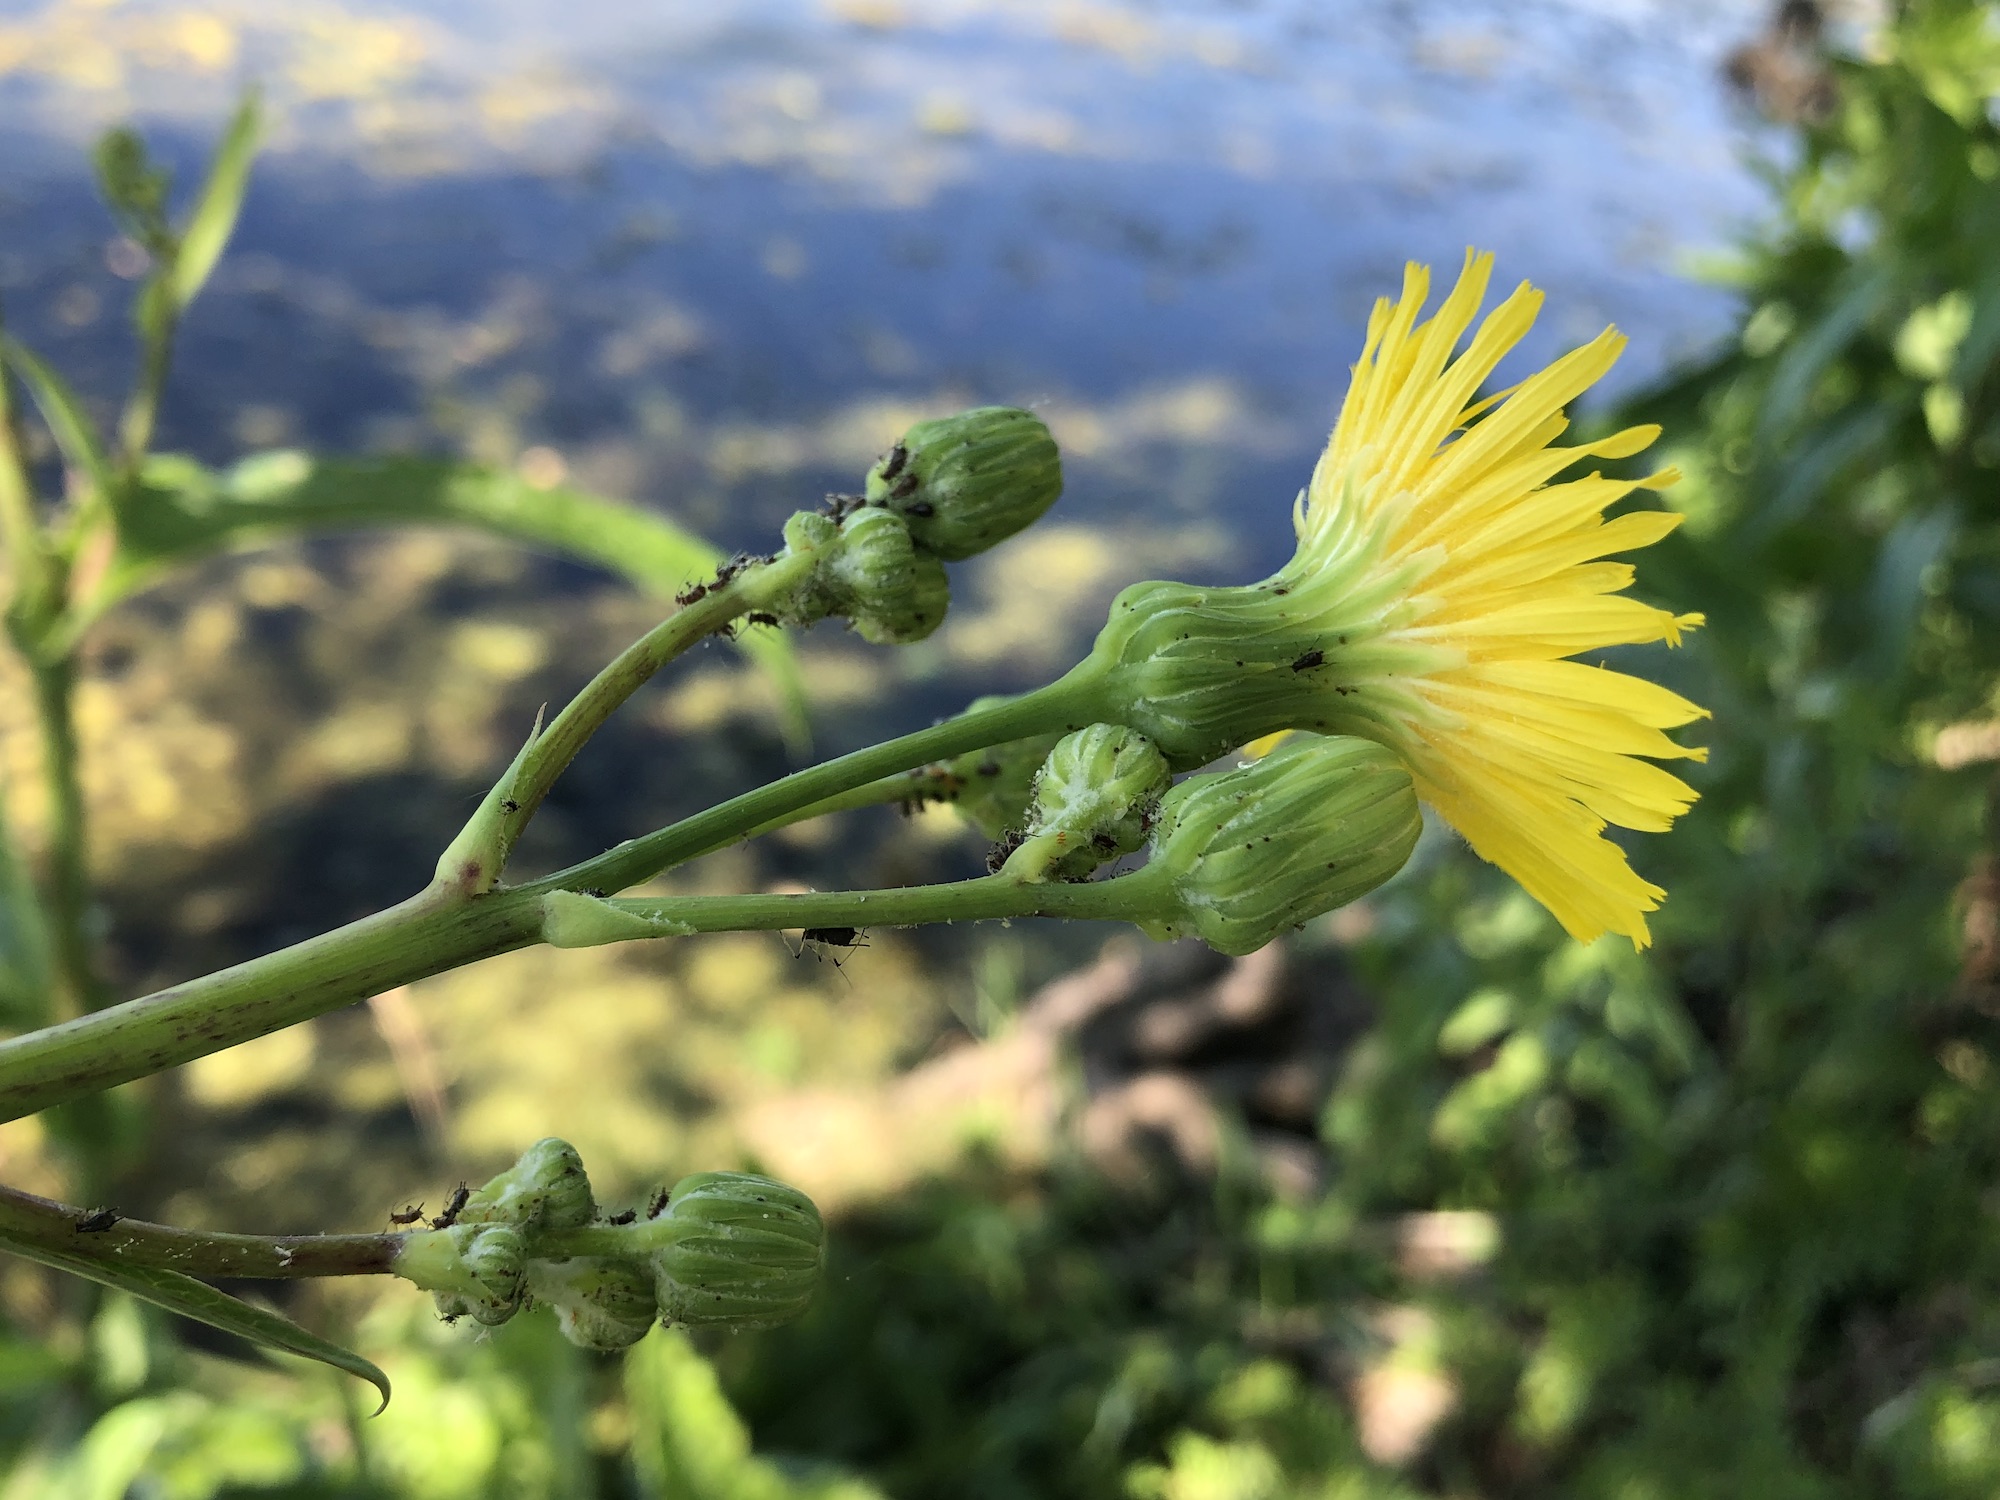 Perennial Sowthistle bracts along shore of Lake Wingra on July 10, 2022.